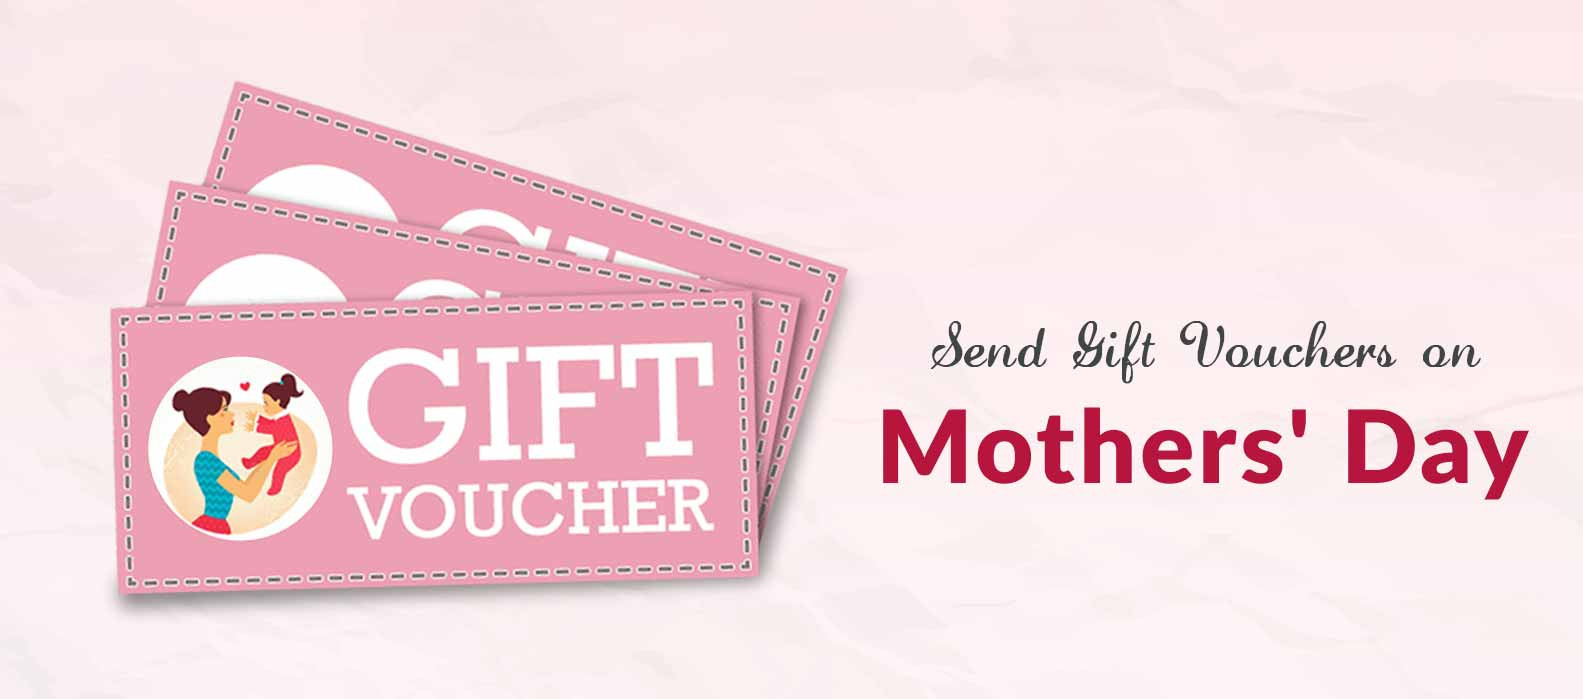 Mothers Day Gifts Online
 Send Gift Vouchers on Mothers Day